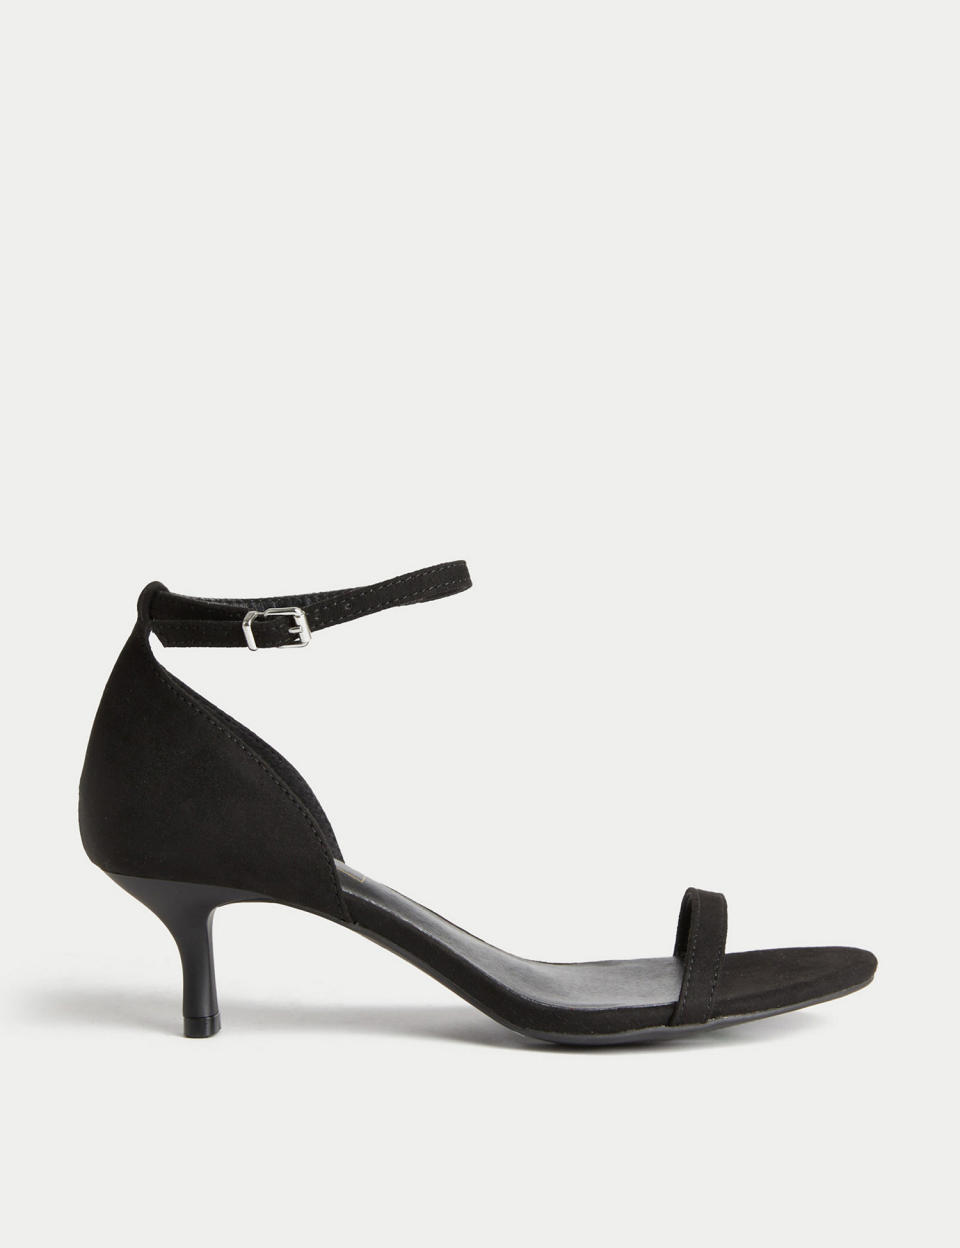 This is the pair of shoes everyone needs in their wardrobe. (M&S)